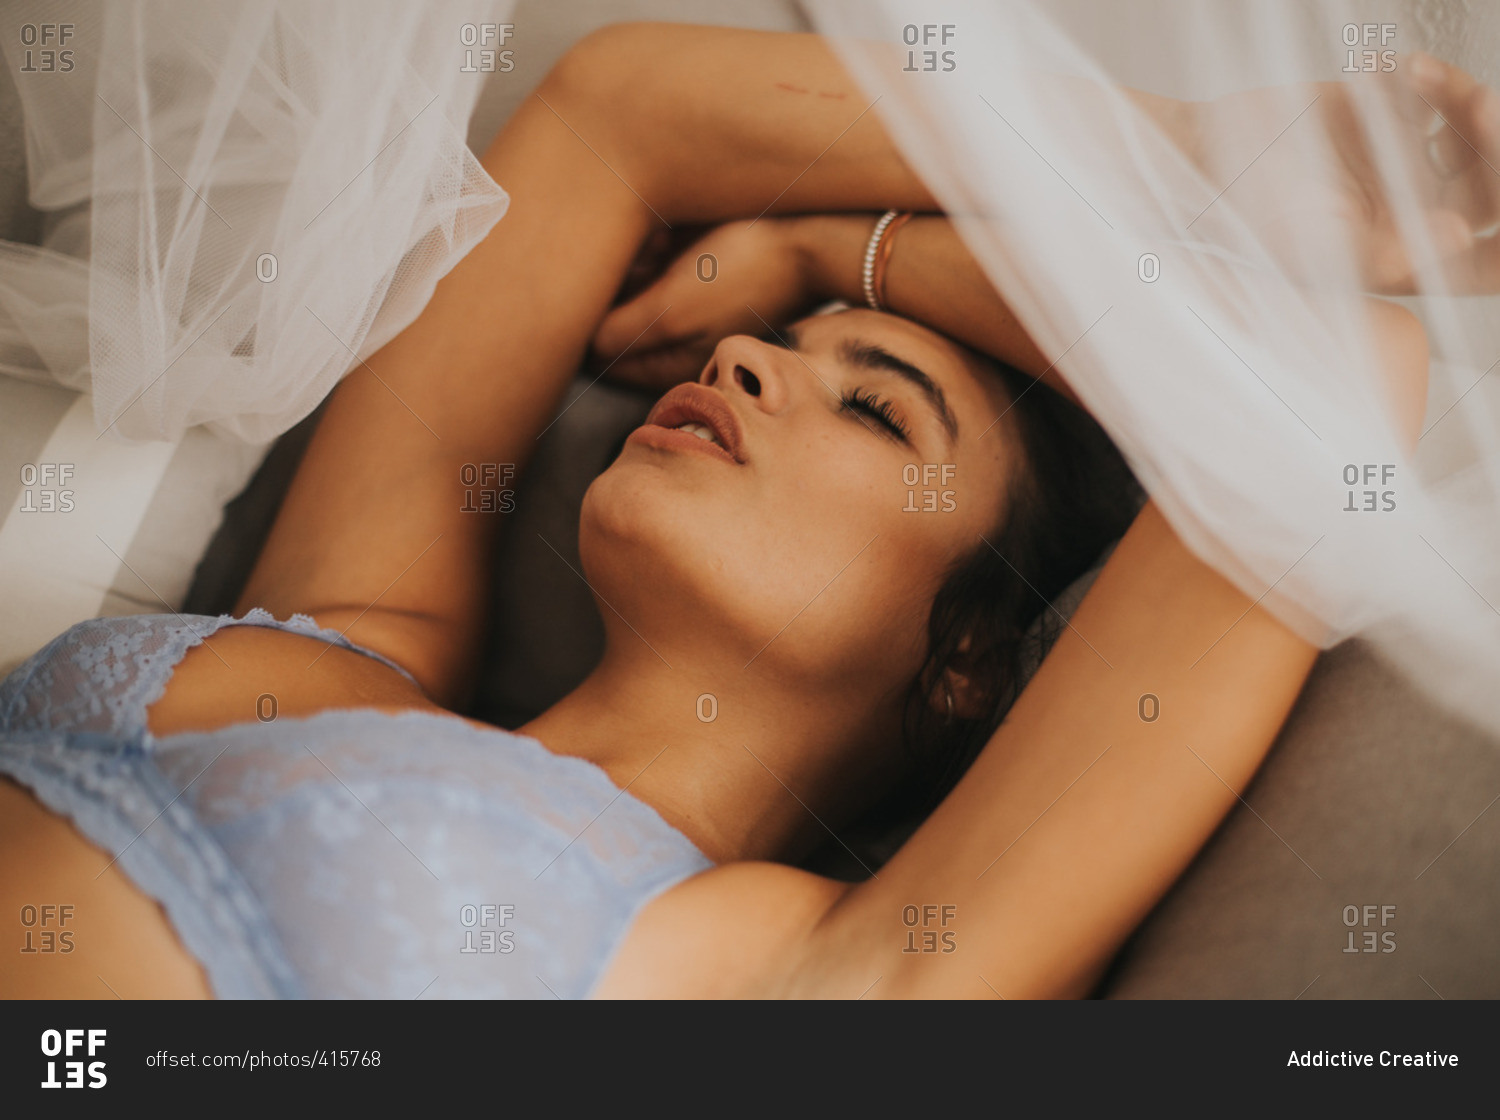 Sexy woman on bed in bra stock photo - OFFSET